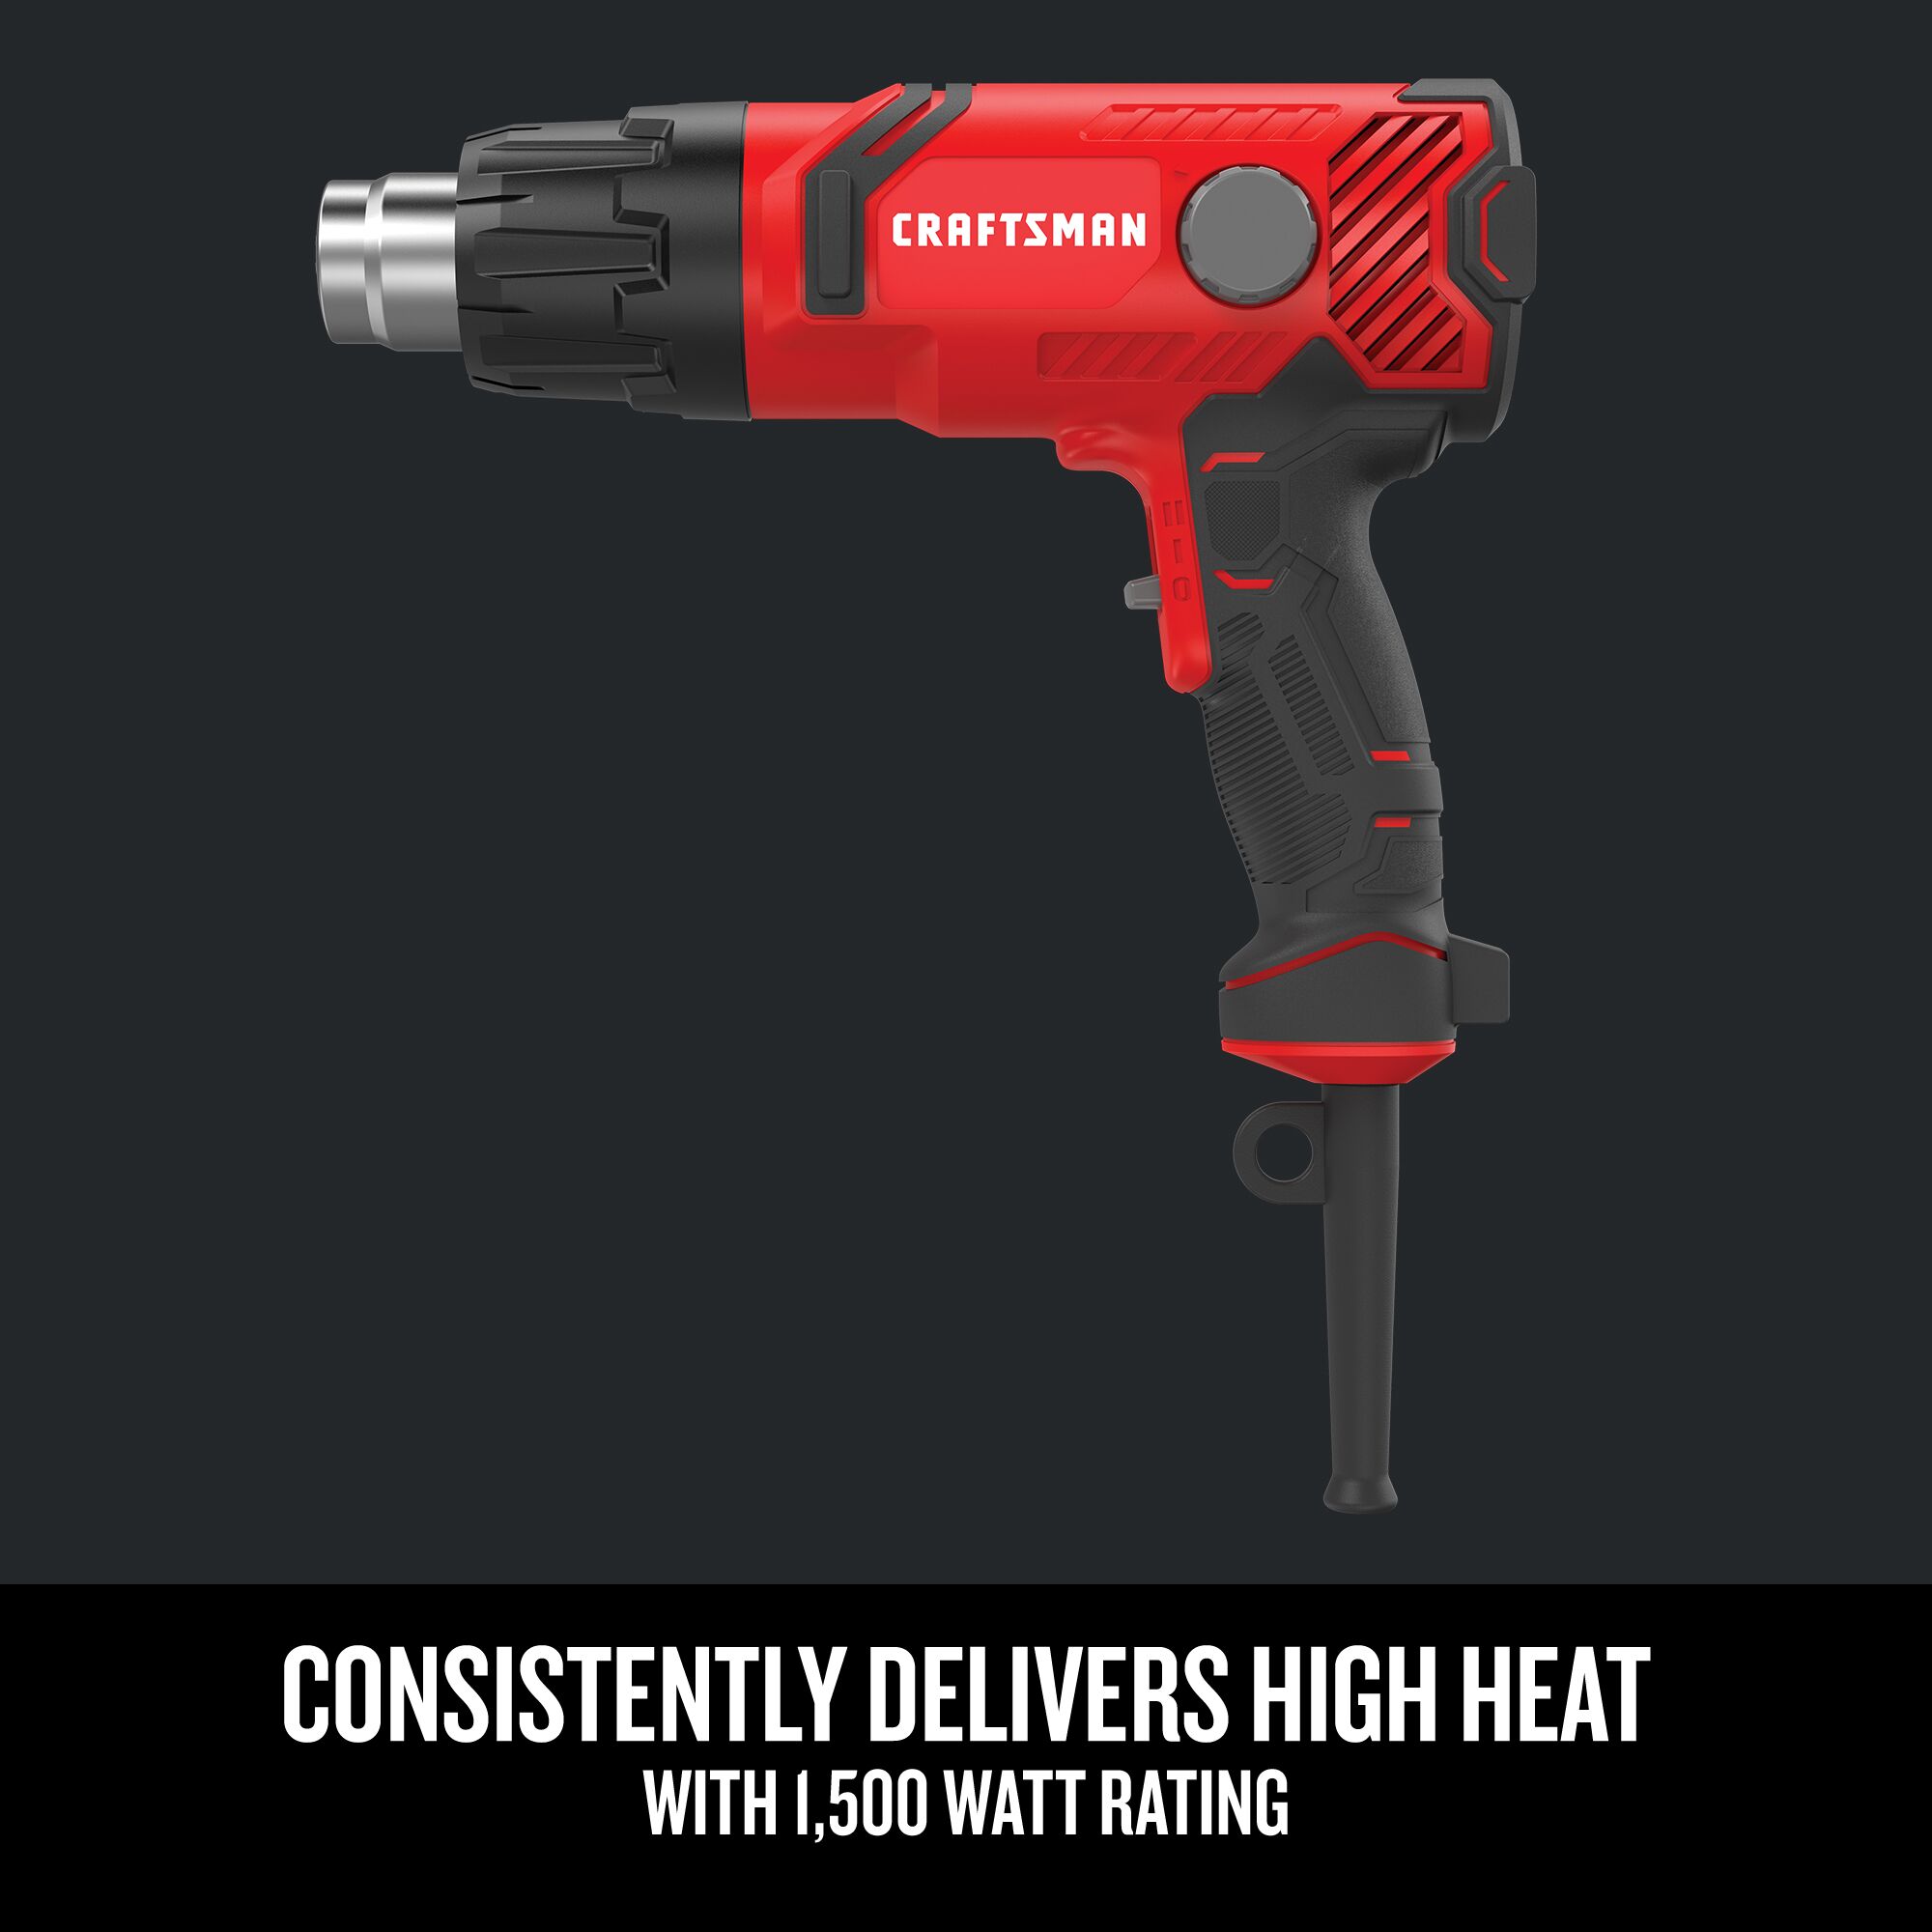 Graphic of CRAFTSMAN Heat Gun highlighting product features